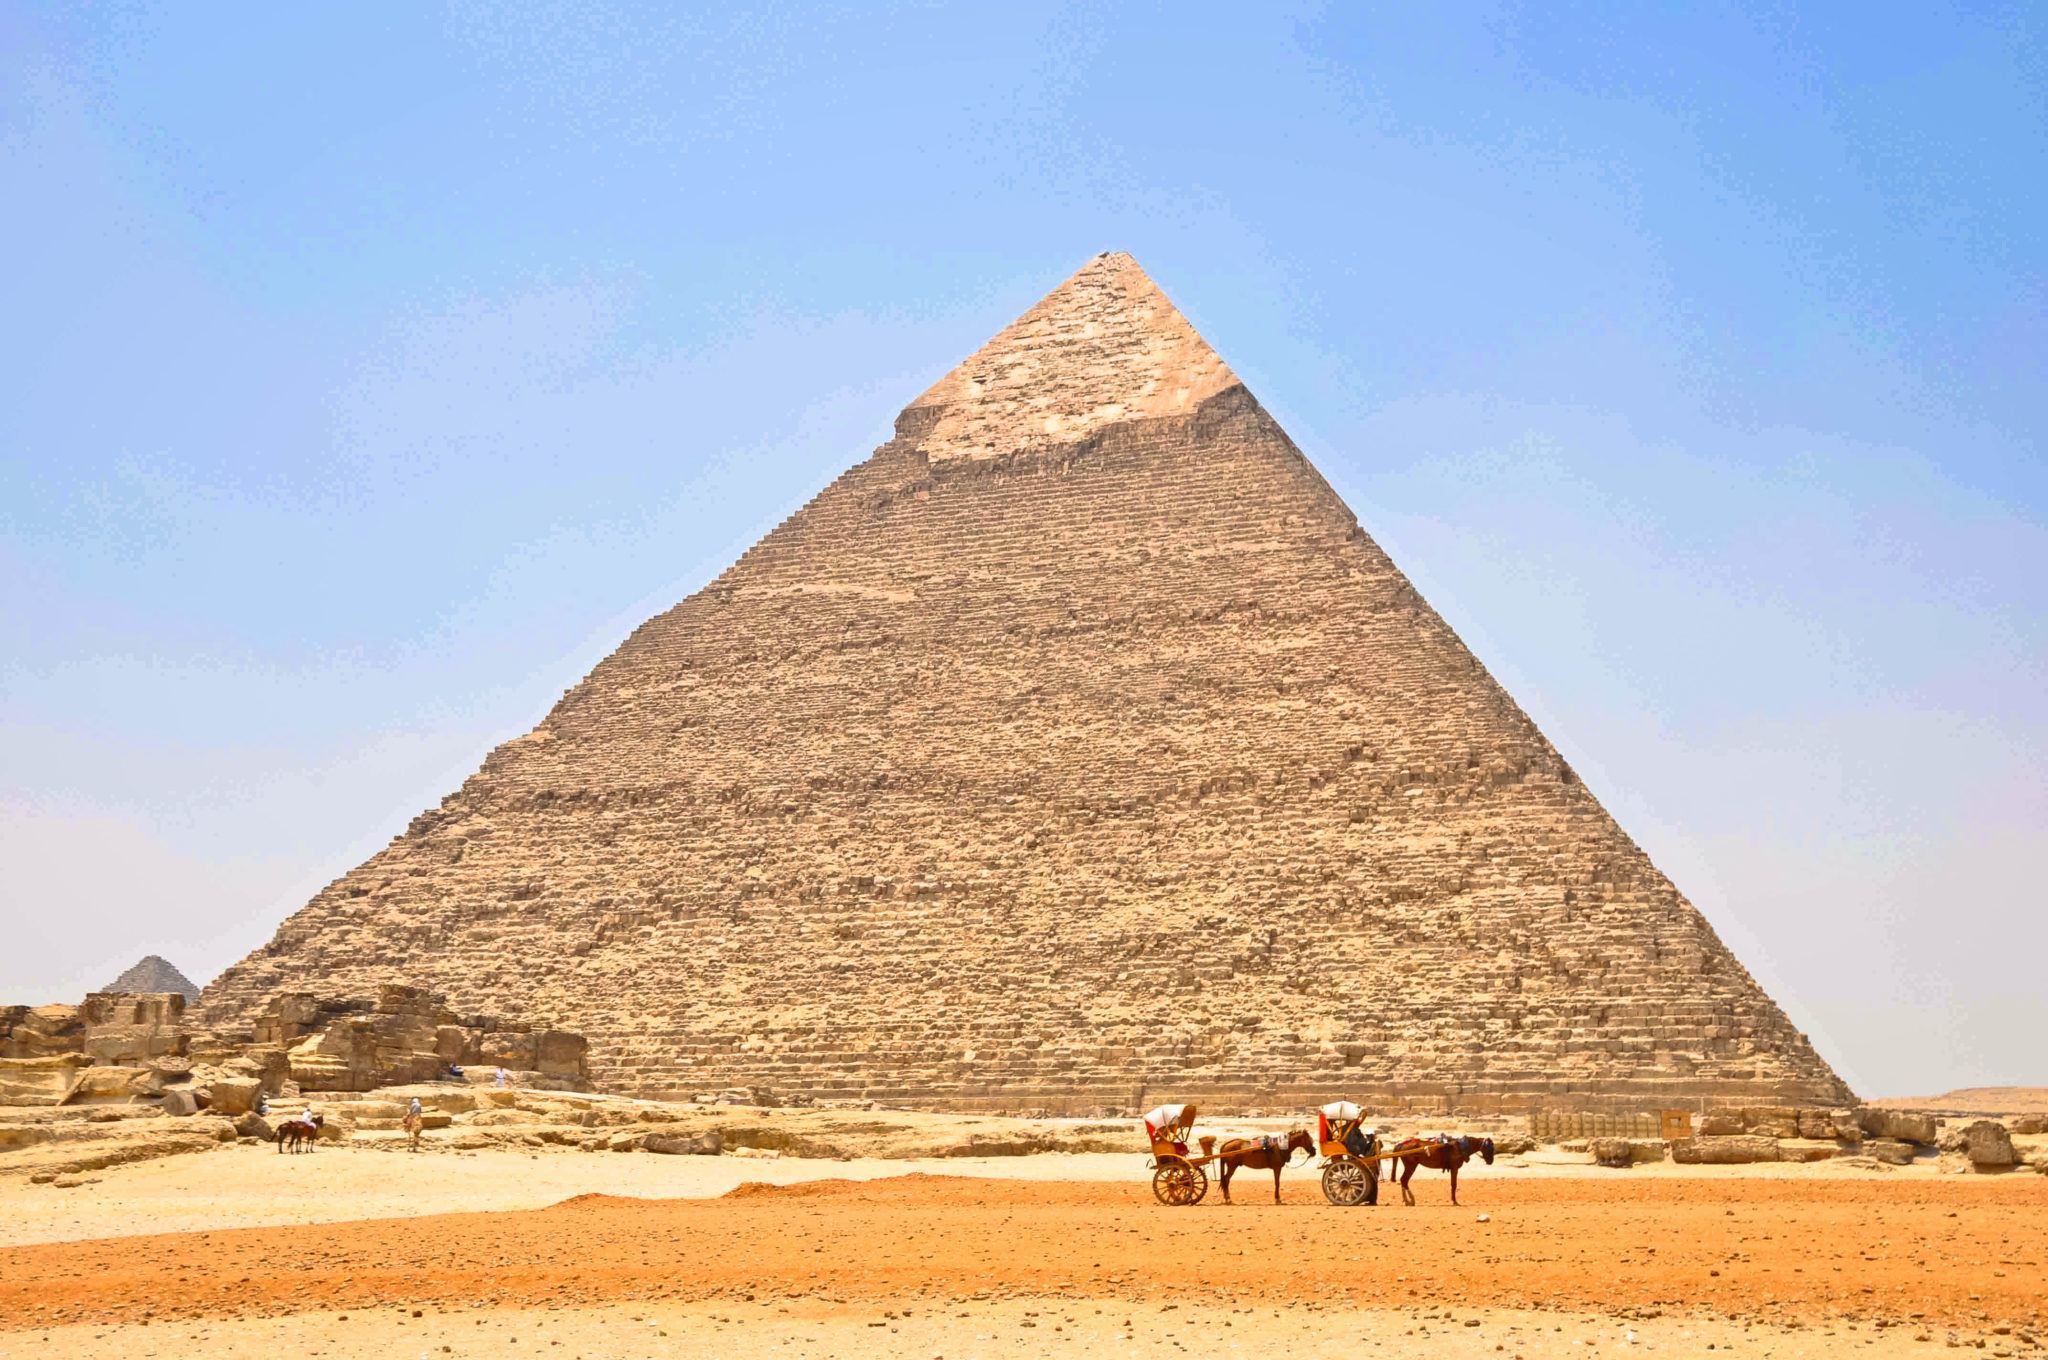 The Great Pyramid of Giza is just one of the amazing things to see in Egypt